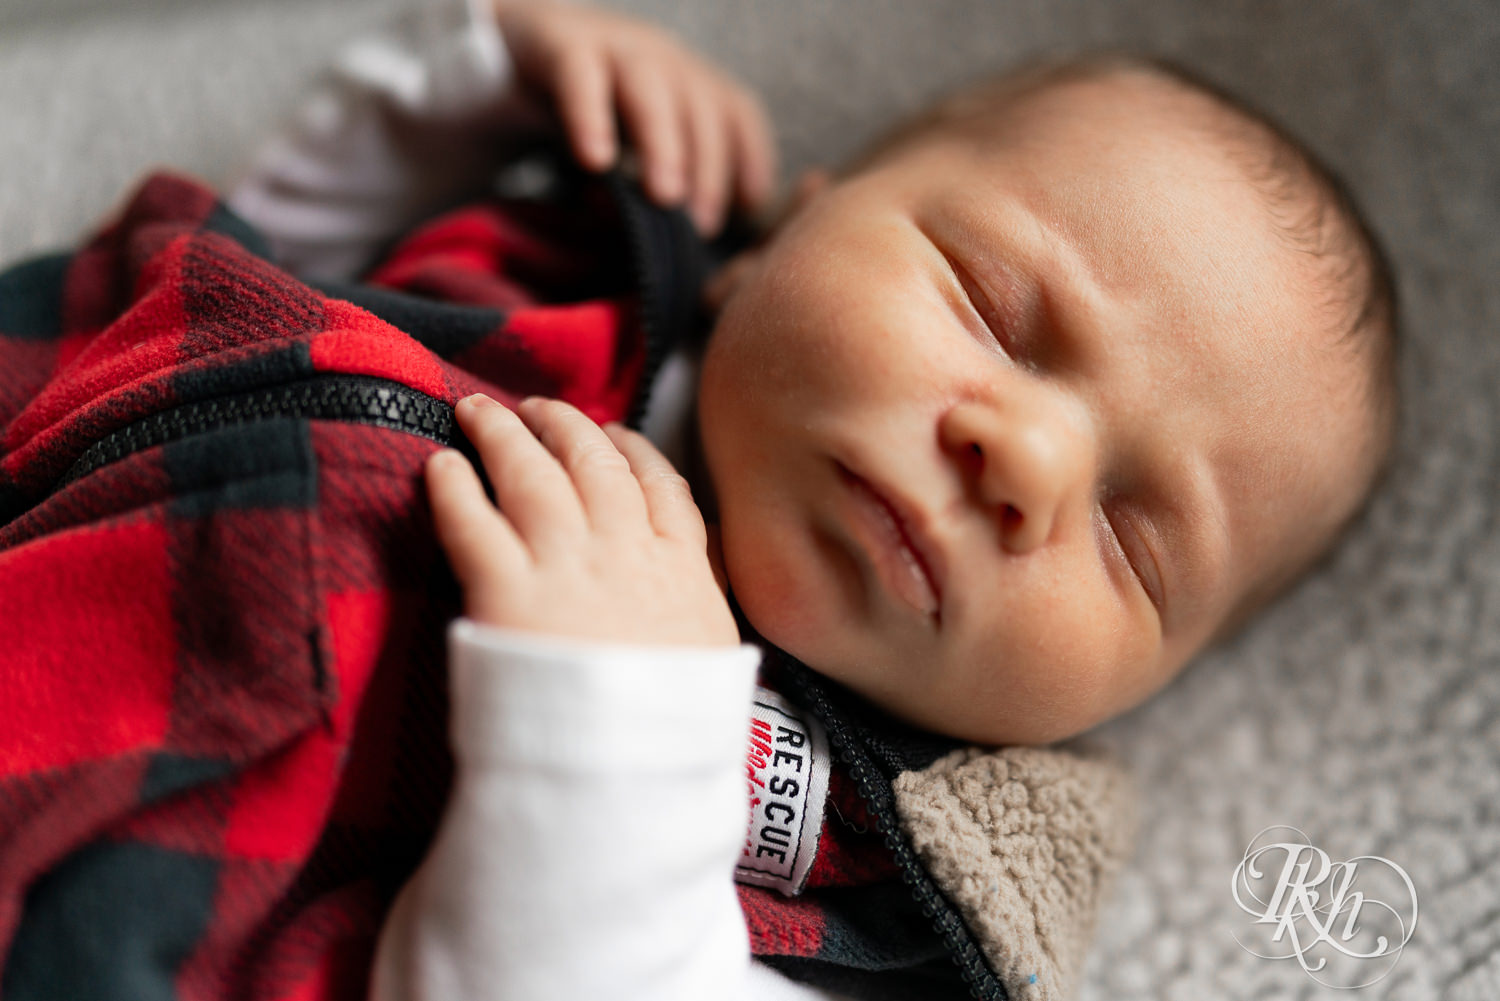 Baby dressed in flannel sleeps during newborn photography session in Ham Lake, Minnesota.